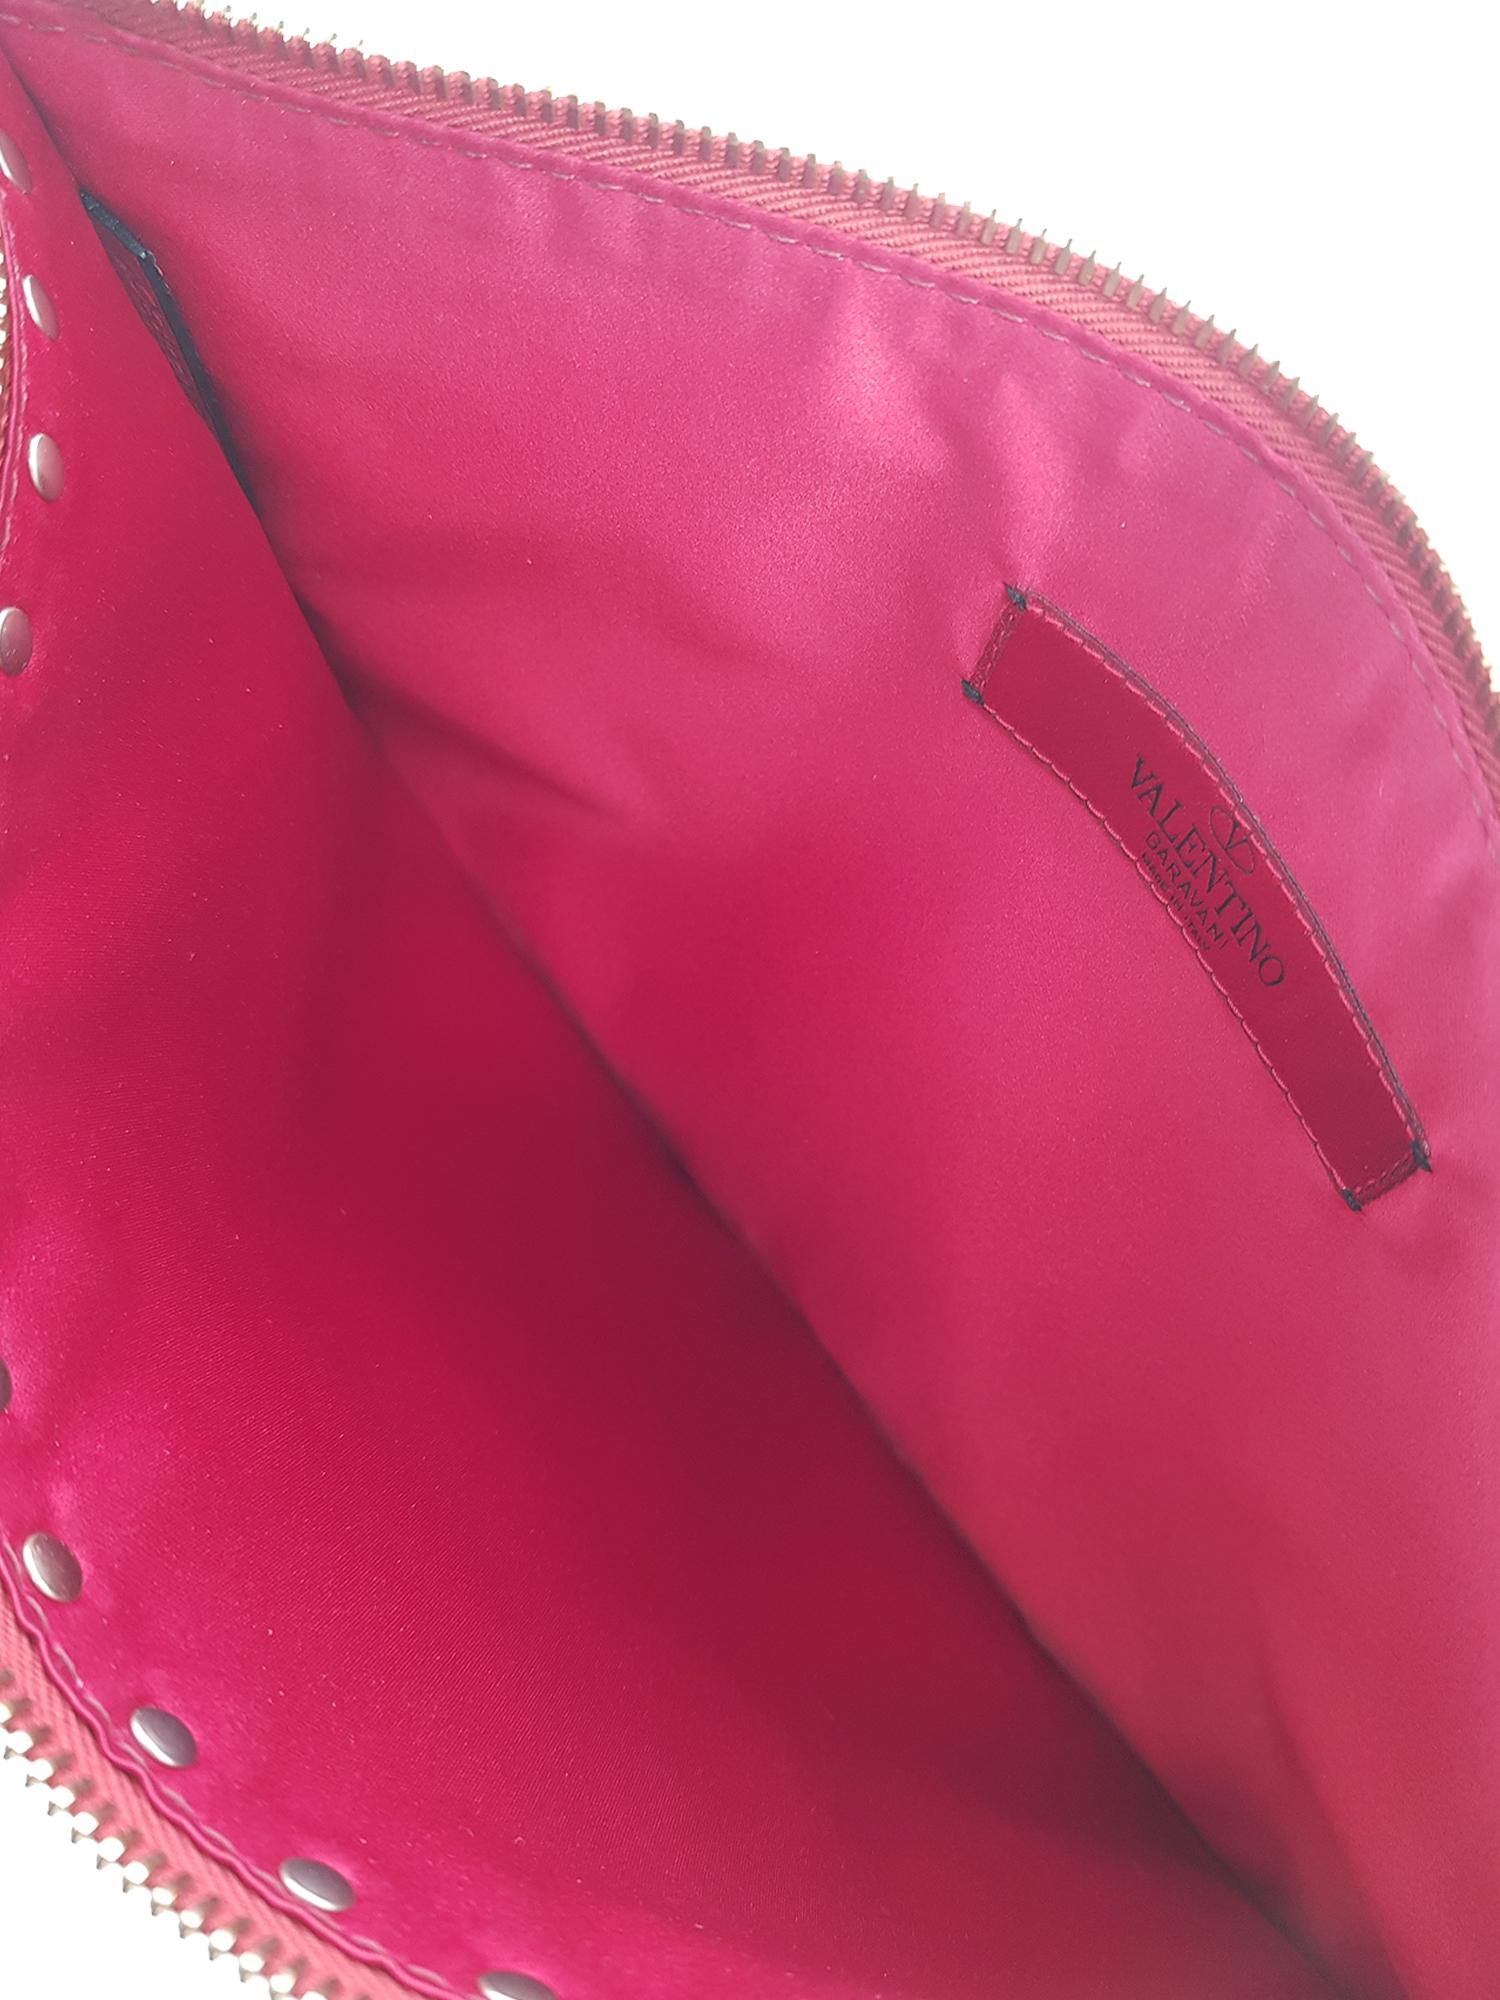 Valentino Woman Handbag Rockstud Red Leather In Good Condition For Sale In Milan, IT